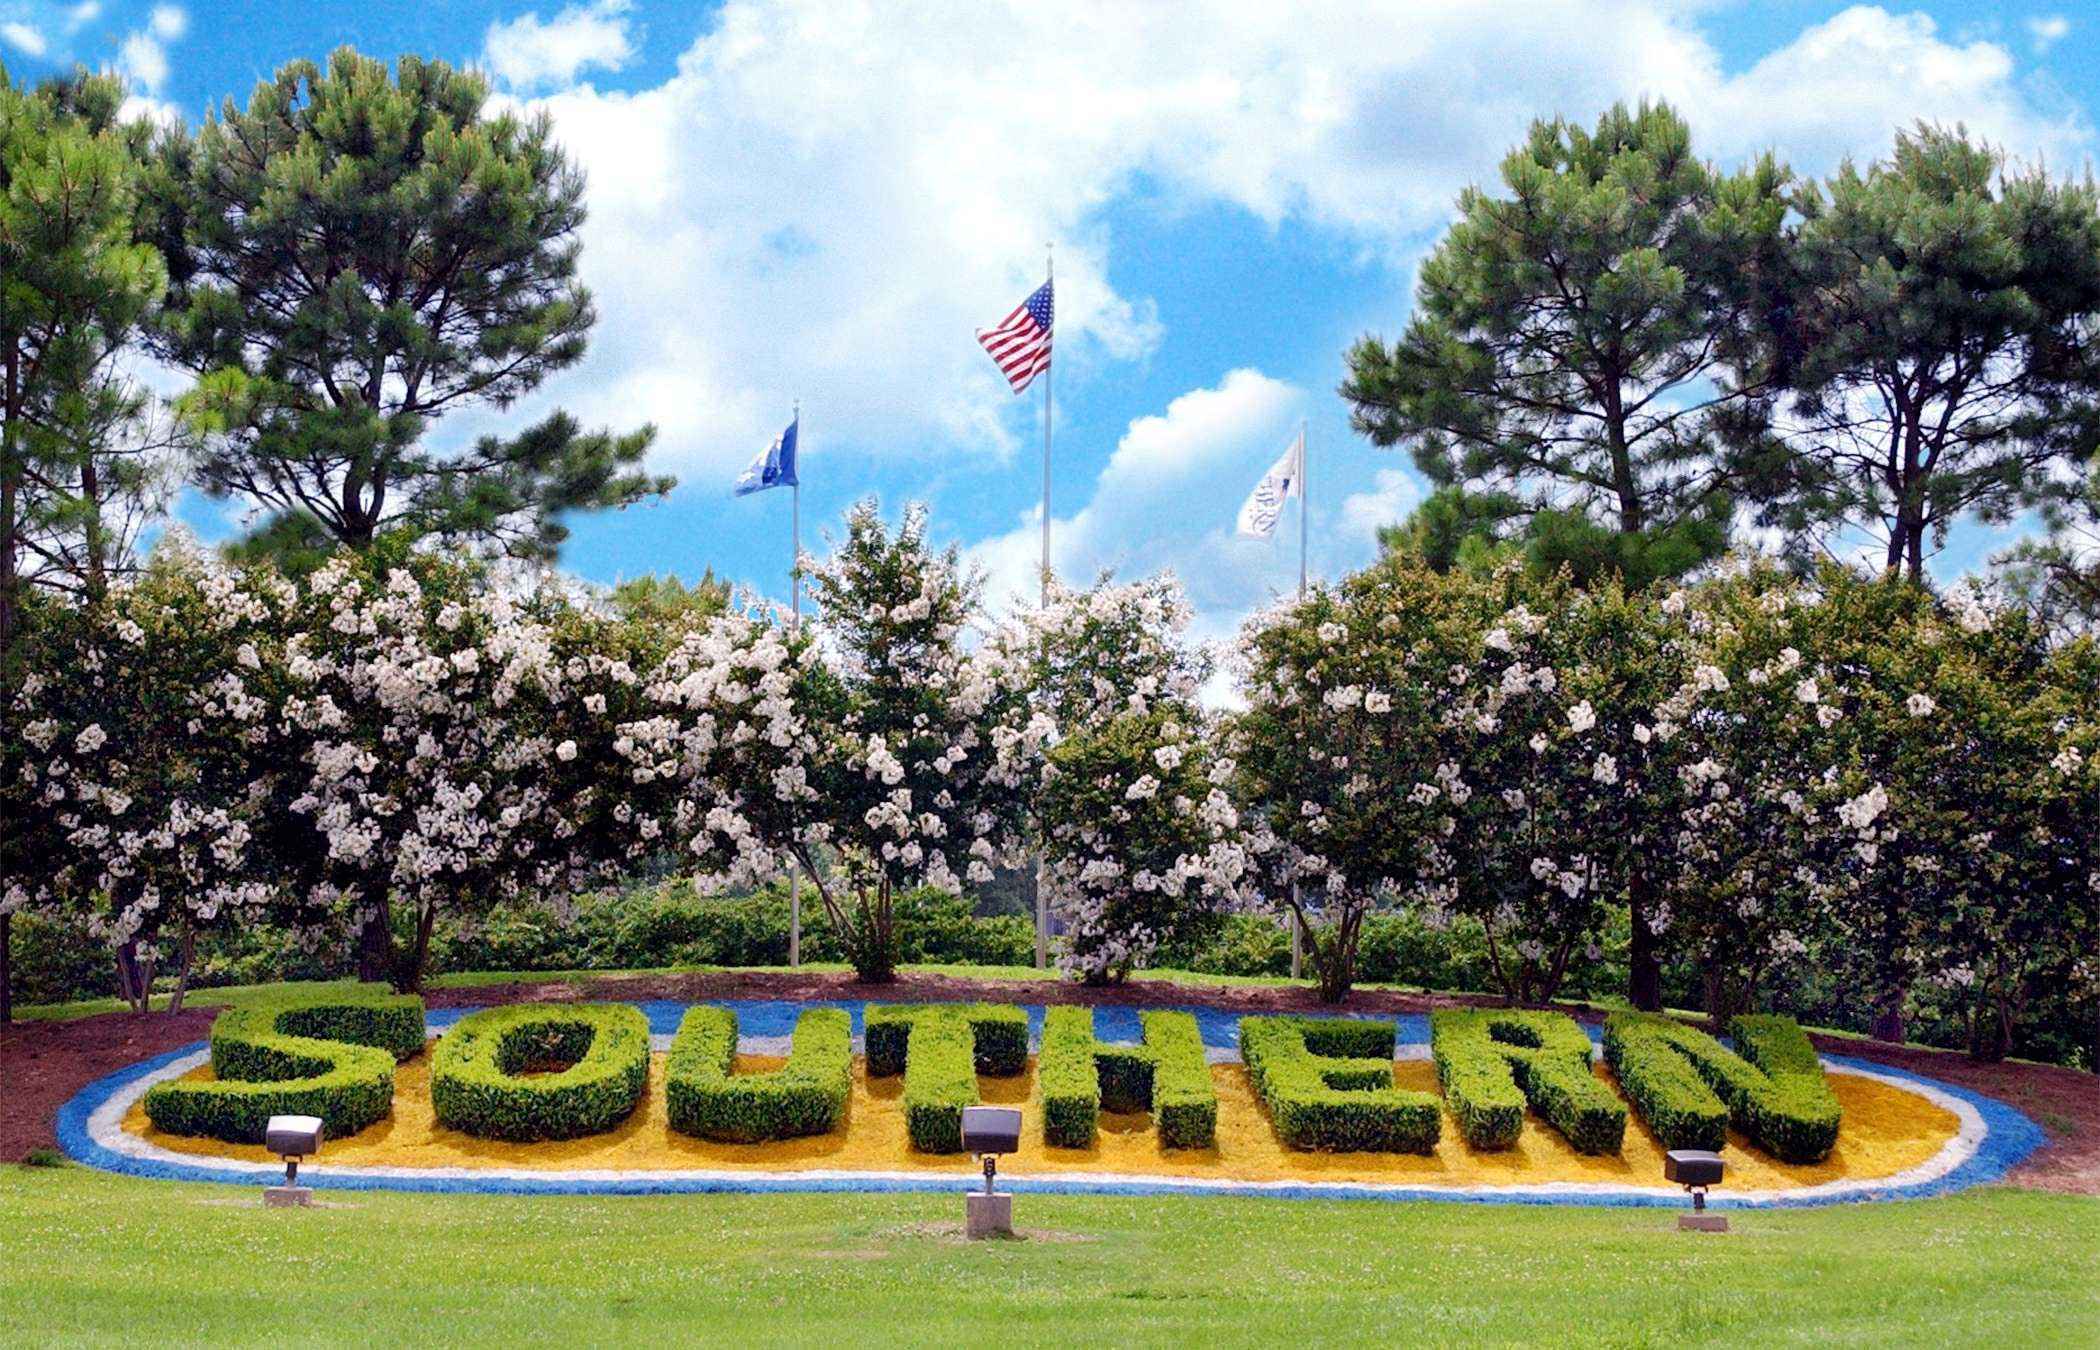 Southern University Agriculture and Mechanical